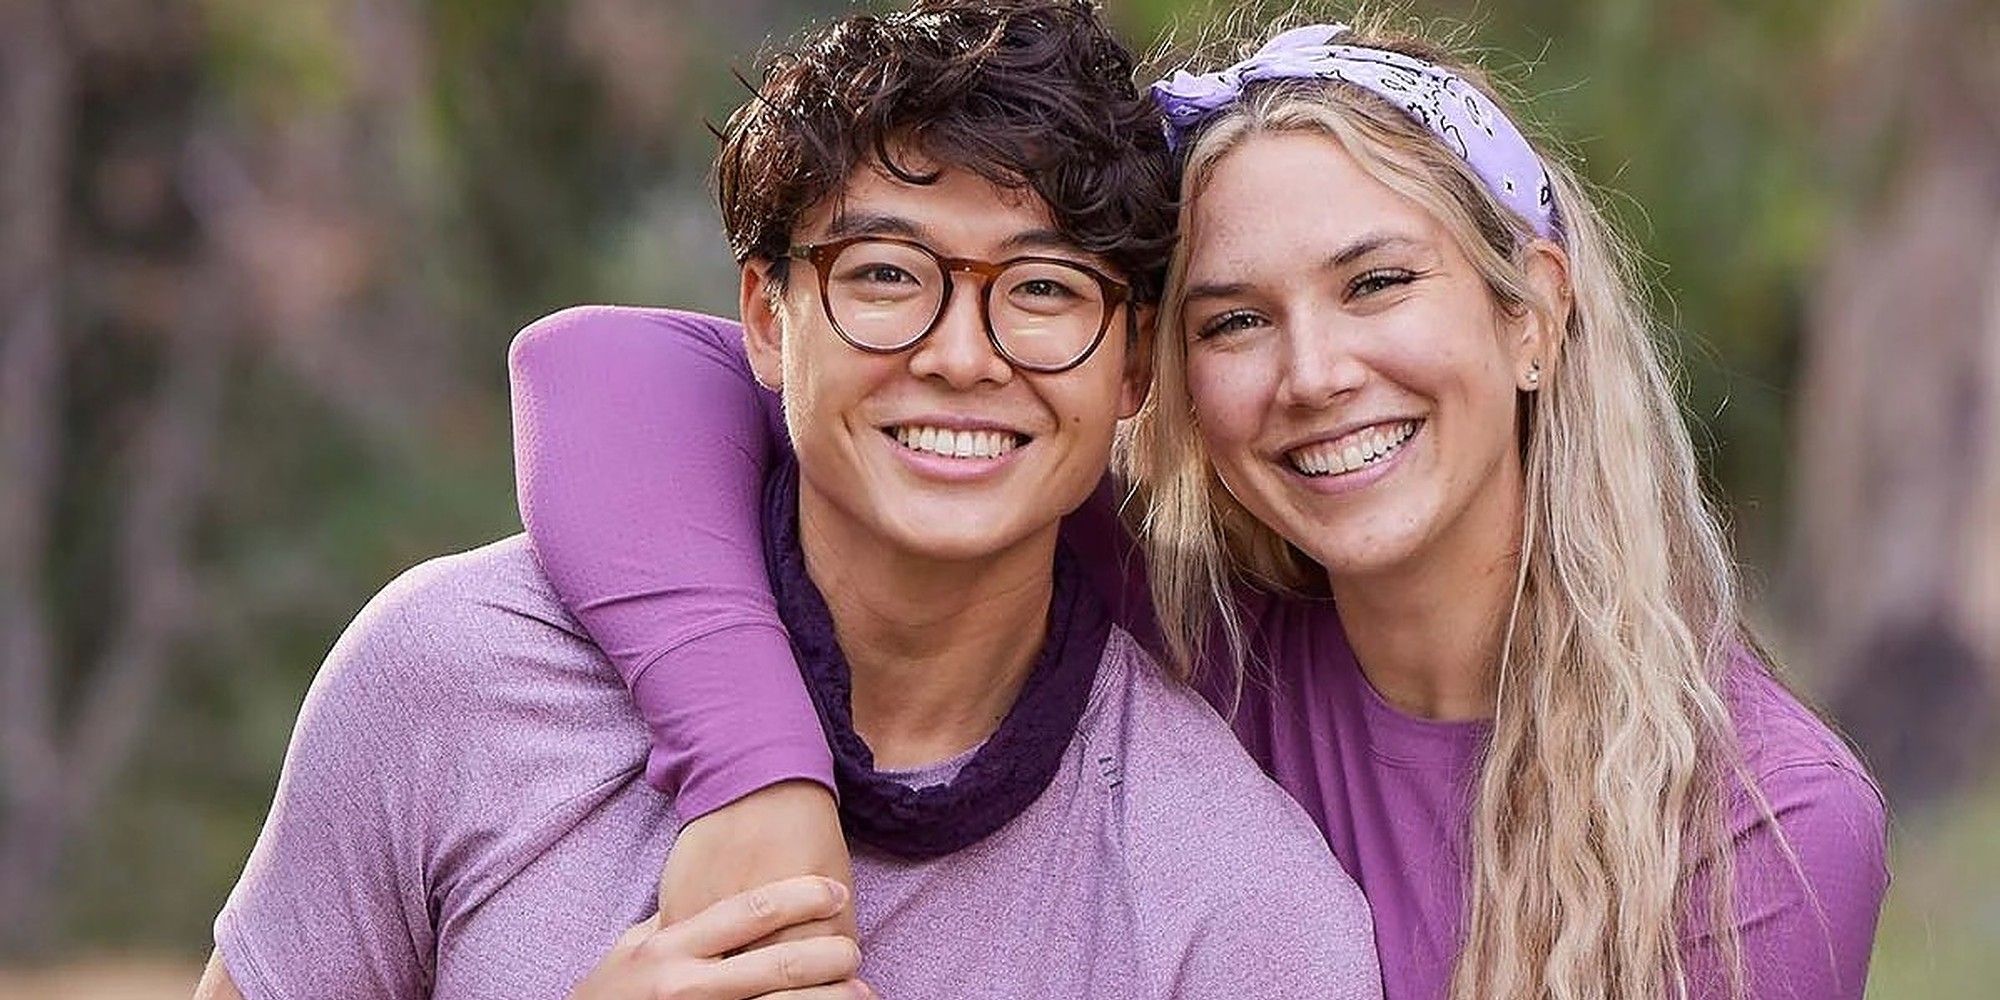 Derek Xiao and Claire Rehfuss from Big Brother 23 and The Amazing Race 34 smiling in purple team gear and Claire's arm around Derek.